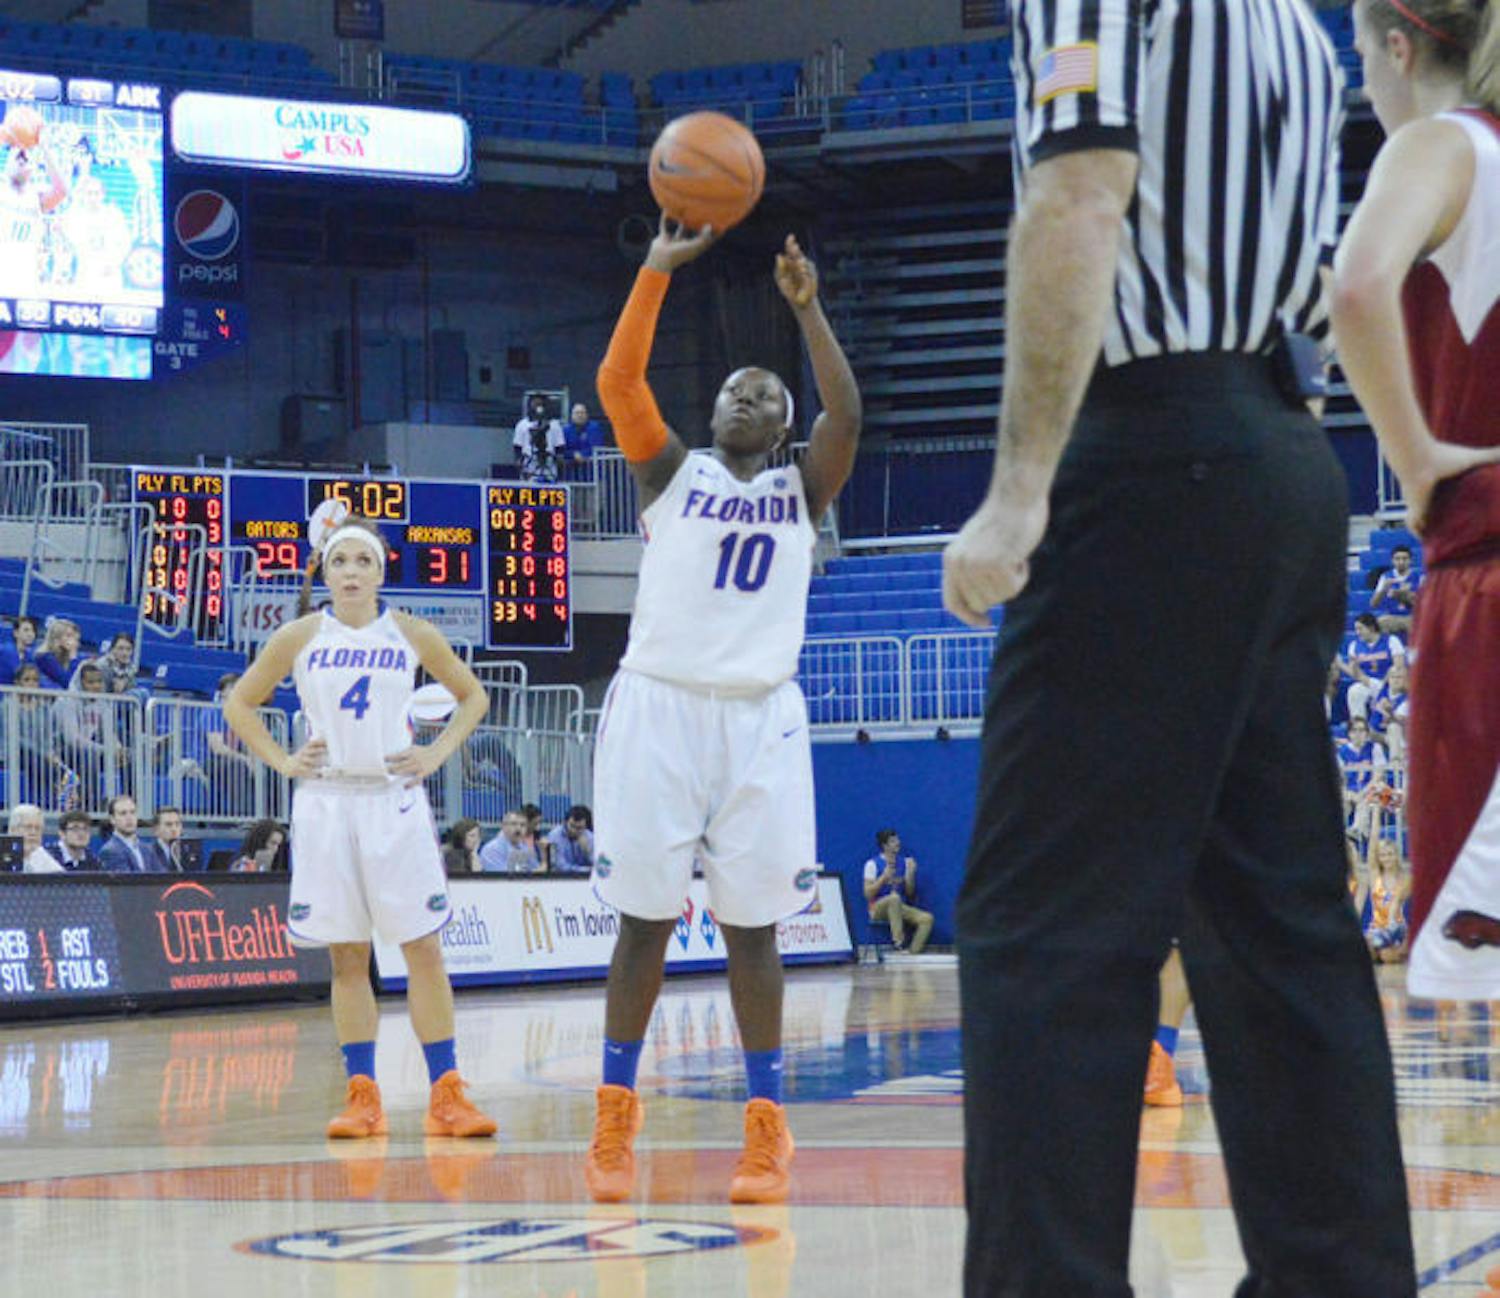 Jaterra Bonds attempts a free throw during Florida’s 59-52 win against Arkansas on Thursday night in the O’Connell Center on Jan. 9, 2014. Bonds scored 15 points in Florida’s victory, which was UF’s ninth straight win. The Gators will attempt to extend their streak to 10 games against No. 12 LSU on Sunday in Baton Rouge, La.